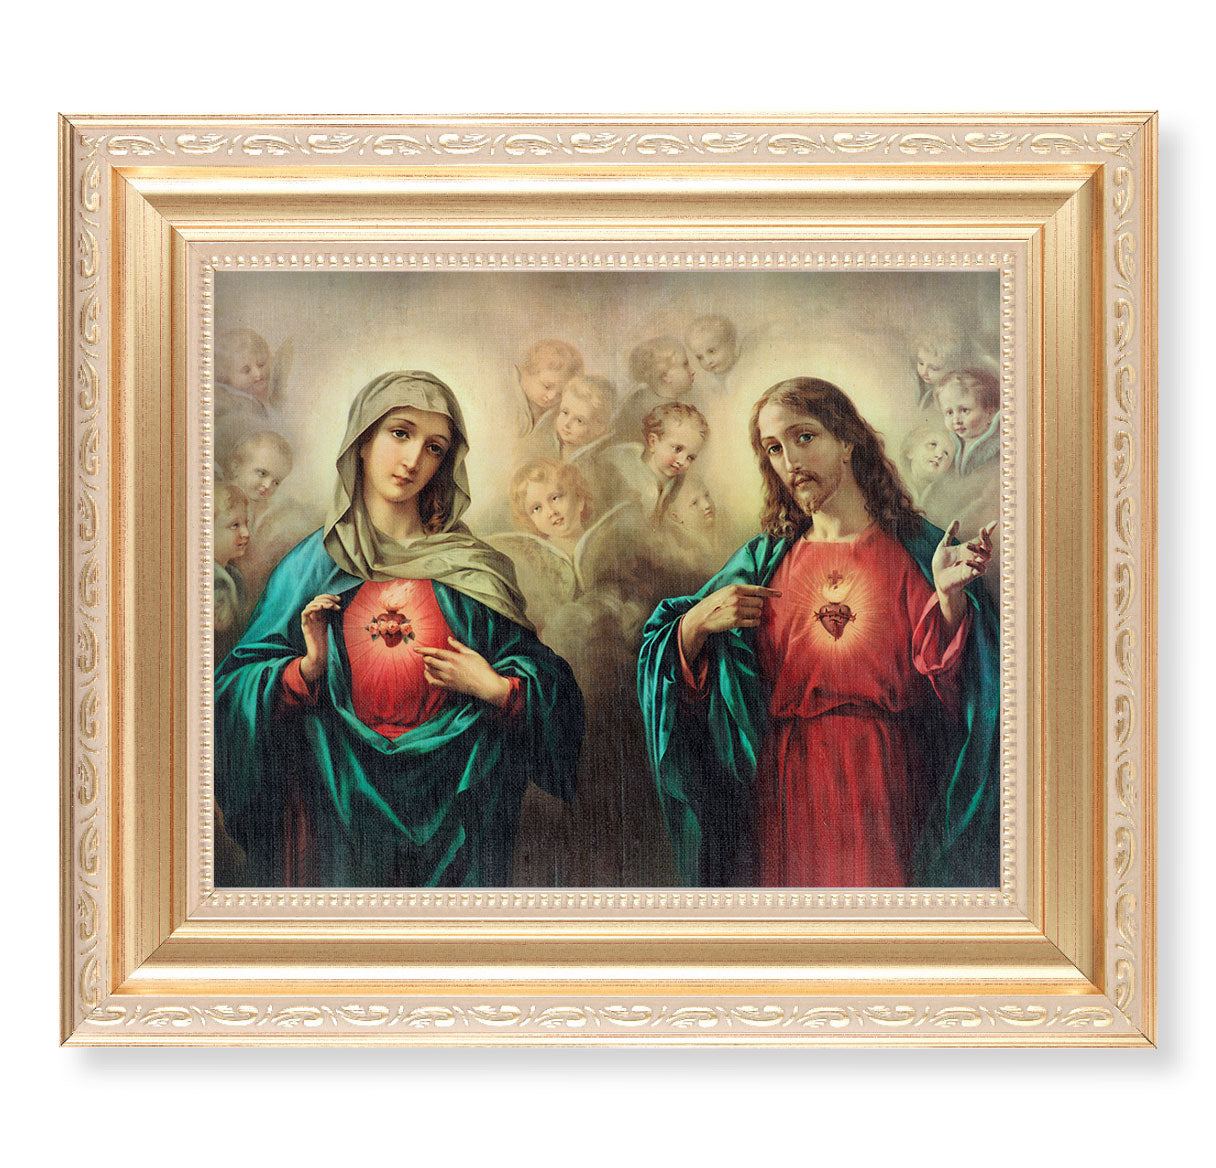 The Sacred Hearts Picture Framed Wall Art Decor, Large, Satin Gold Fluted Frame with Distressed Finish and Fine Detailed Scrollwork